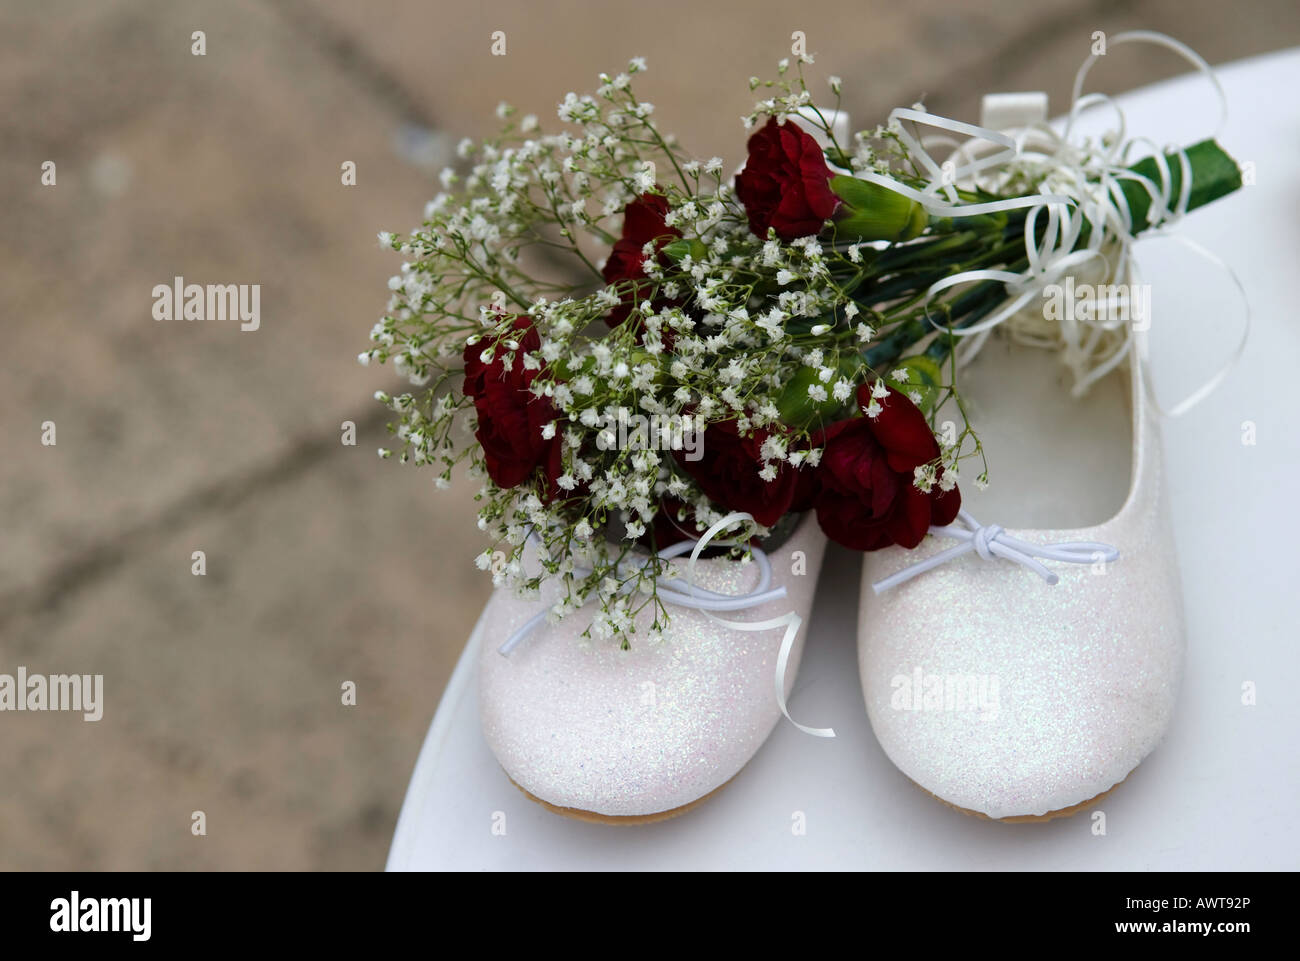 A pair of a child's briesmade shoes and a bouquet roses on a table following a wedding. Stock Photo